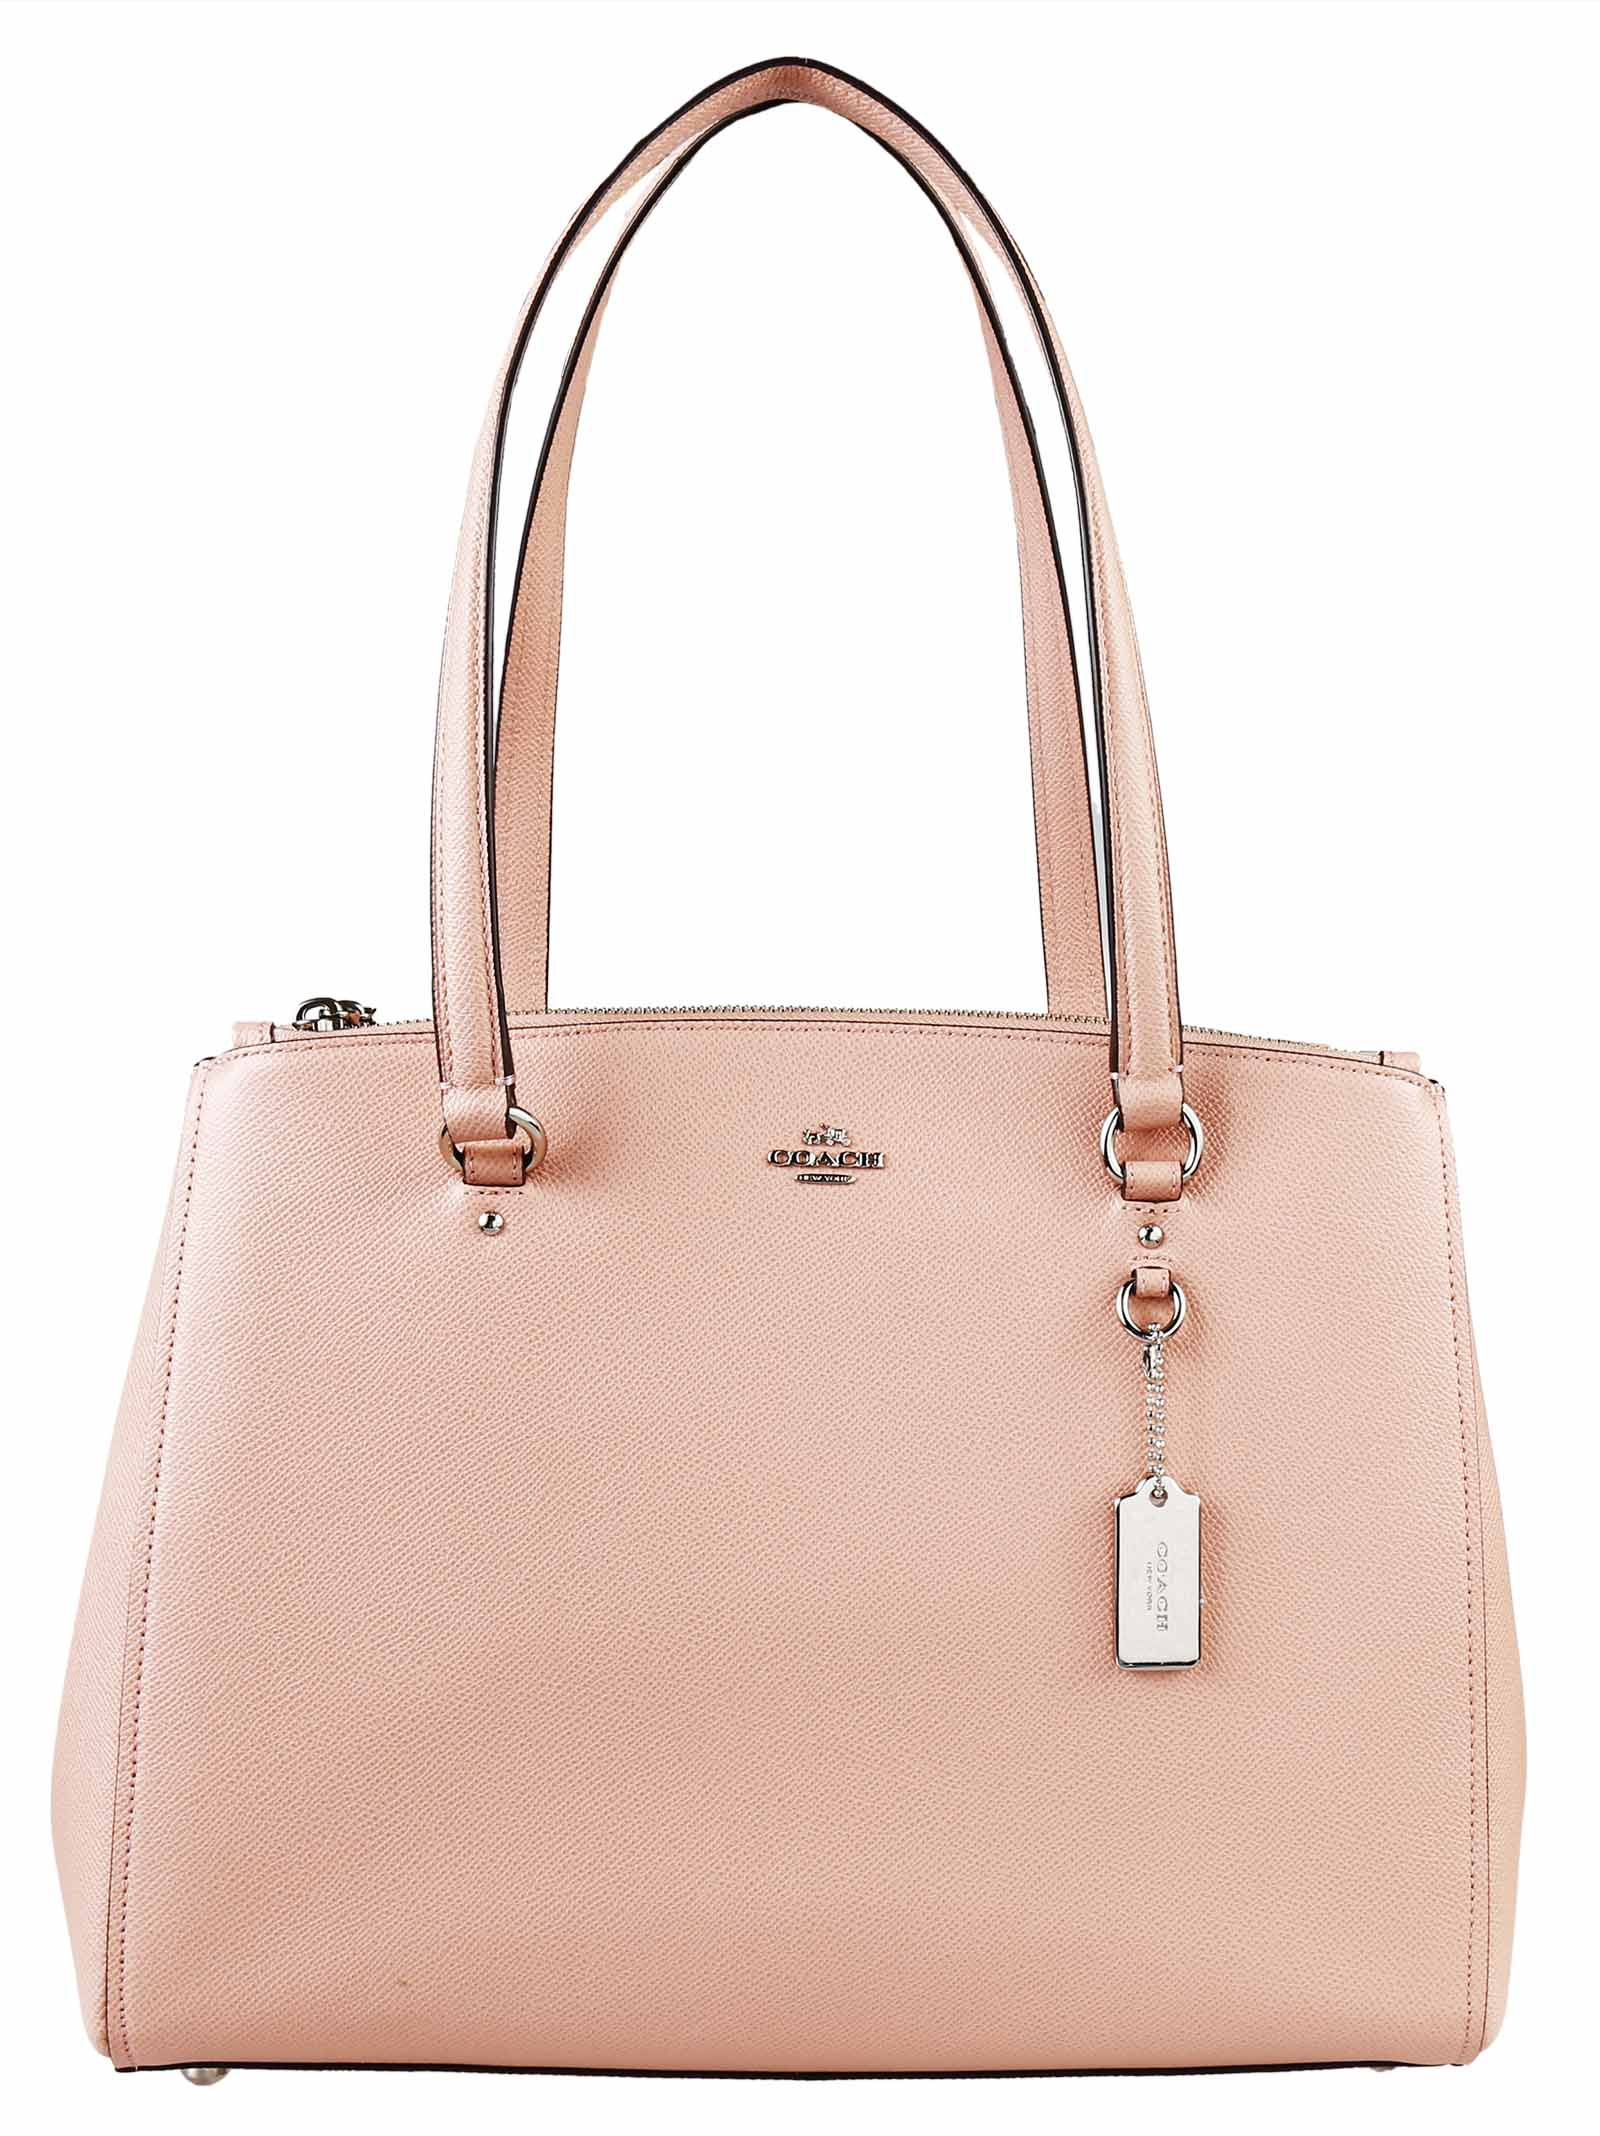 Coach Stanton Crossgrain Leather Bag in Pink (Blush) | Lyst